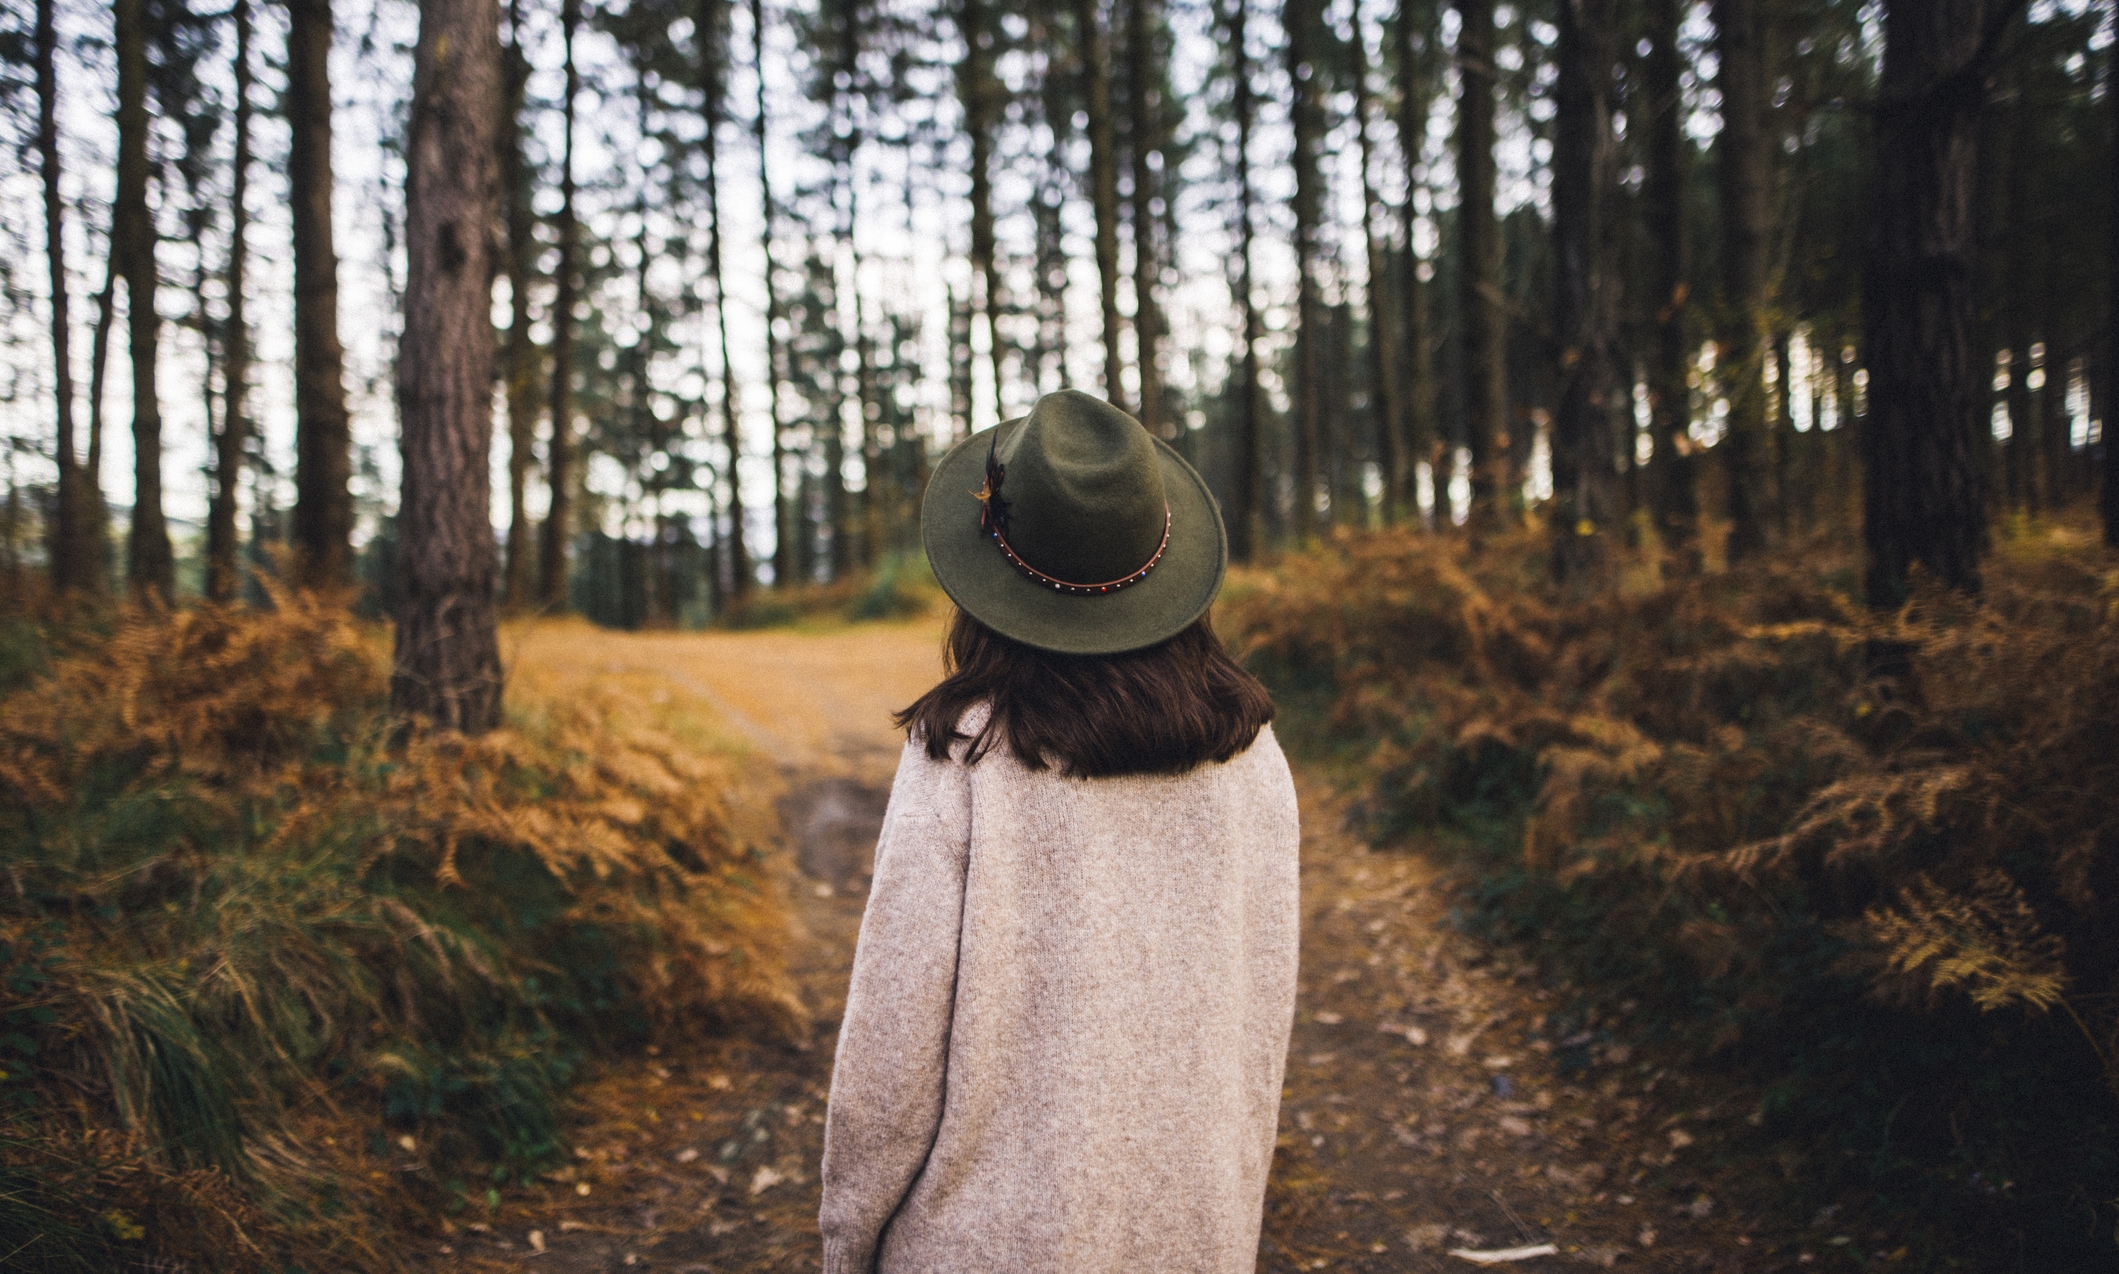 A young woman wearing a hat and walking by a beautiful forest area